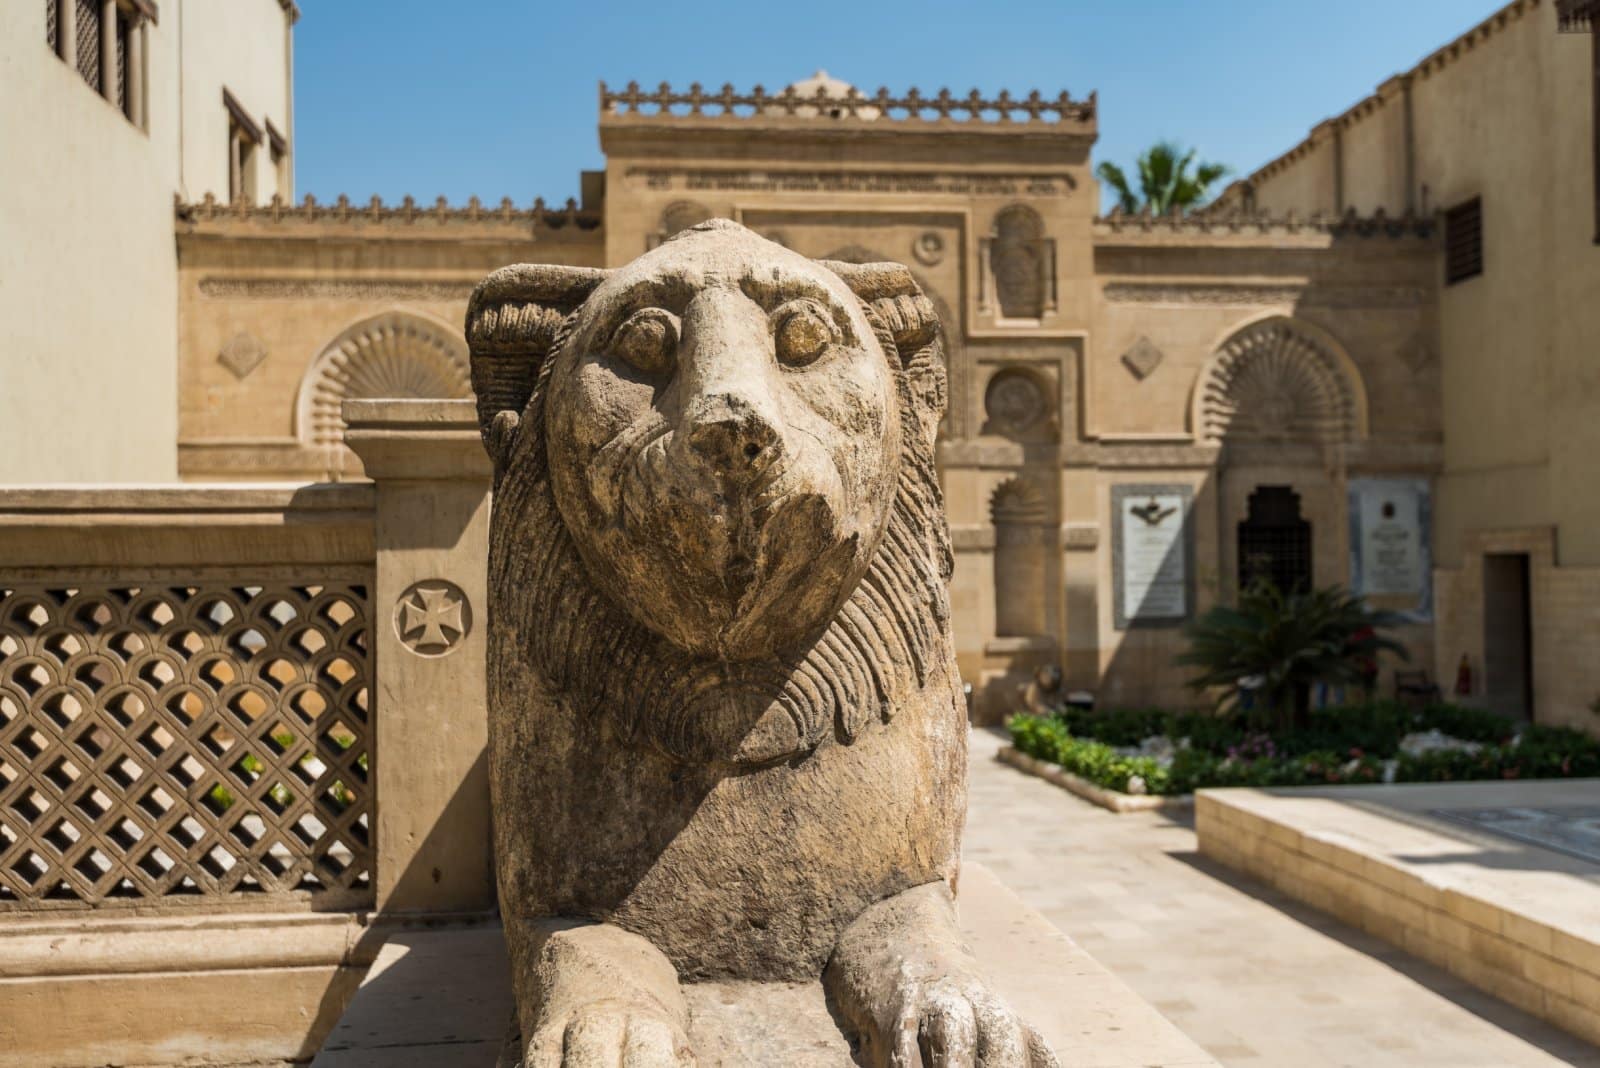 <p class="wp-caption-text">Image Credit: Shutterstock / Victor Jiang</p>  <p><span>Coptic Cairo is a unique part of the city, offering insight into Egypt’s Christian heritage. This area houses the Babylon Fortress, the Coptic Museum, the Hanging Church, and other ancient churches, monasteries, and synagogues, some of which date back to the early Christian period. The Hanging Church, built atop the gatehouse of the Roman fortress, is particularly notable for its architecture and the collection of Coptic Christian art. Coptic Cairo provides a window into the religious and cultural life of Egypt’s Christian community and showcases the continuity of worship and tradition in this ancient land.</span> </p>